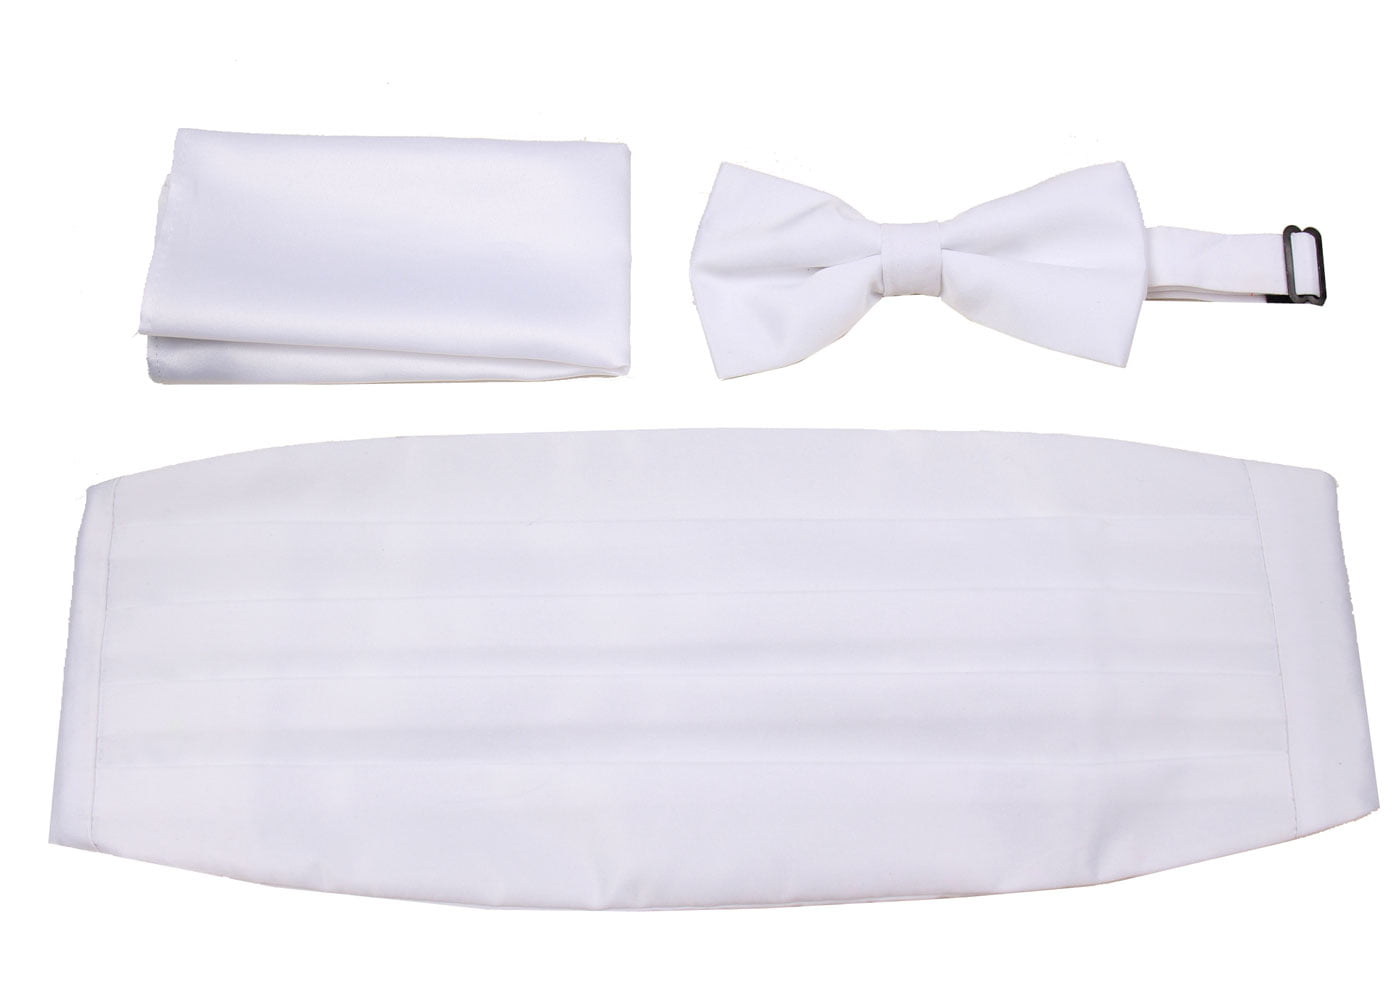 Mens Formal Woven Satin Cummerbund Pre-Tied Bowtie Hanky set Many Solid Colors Available